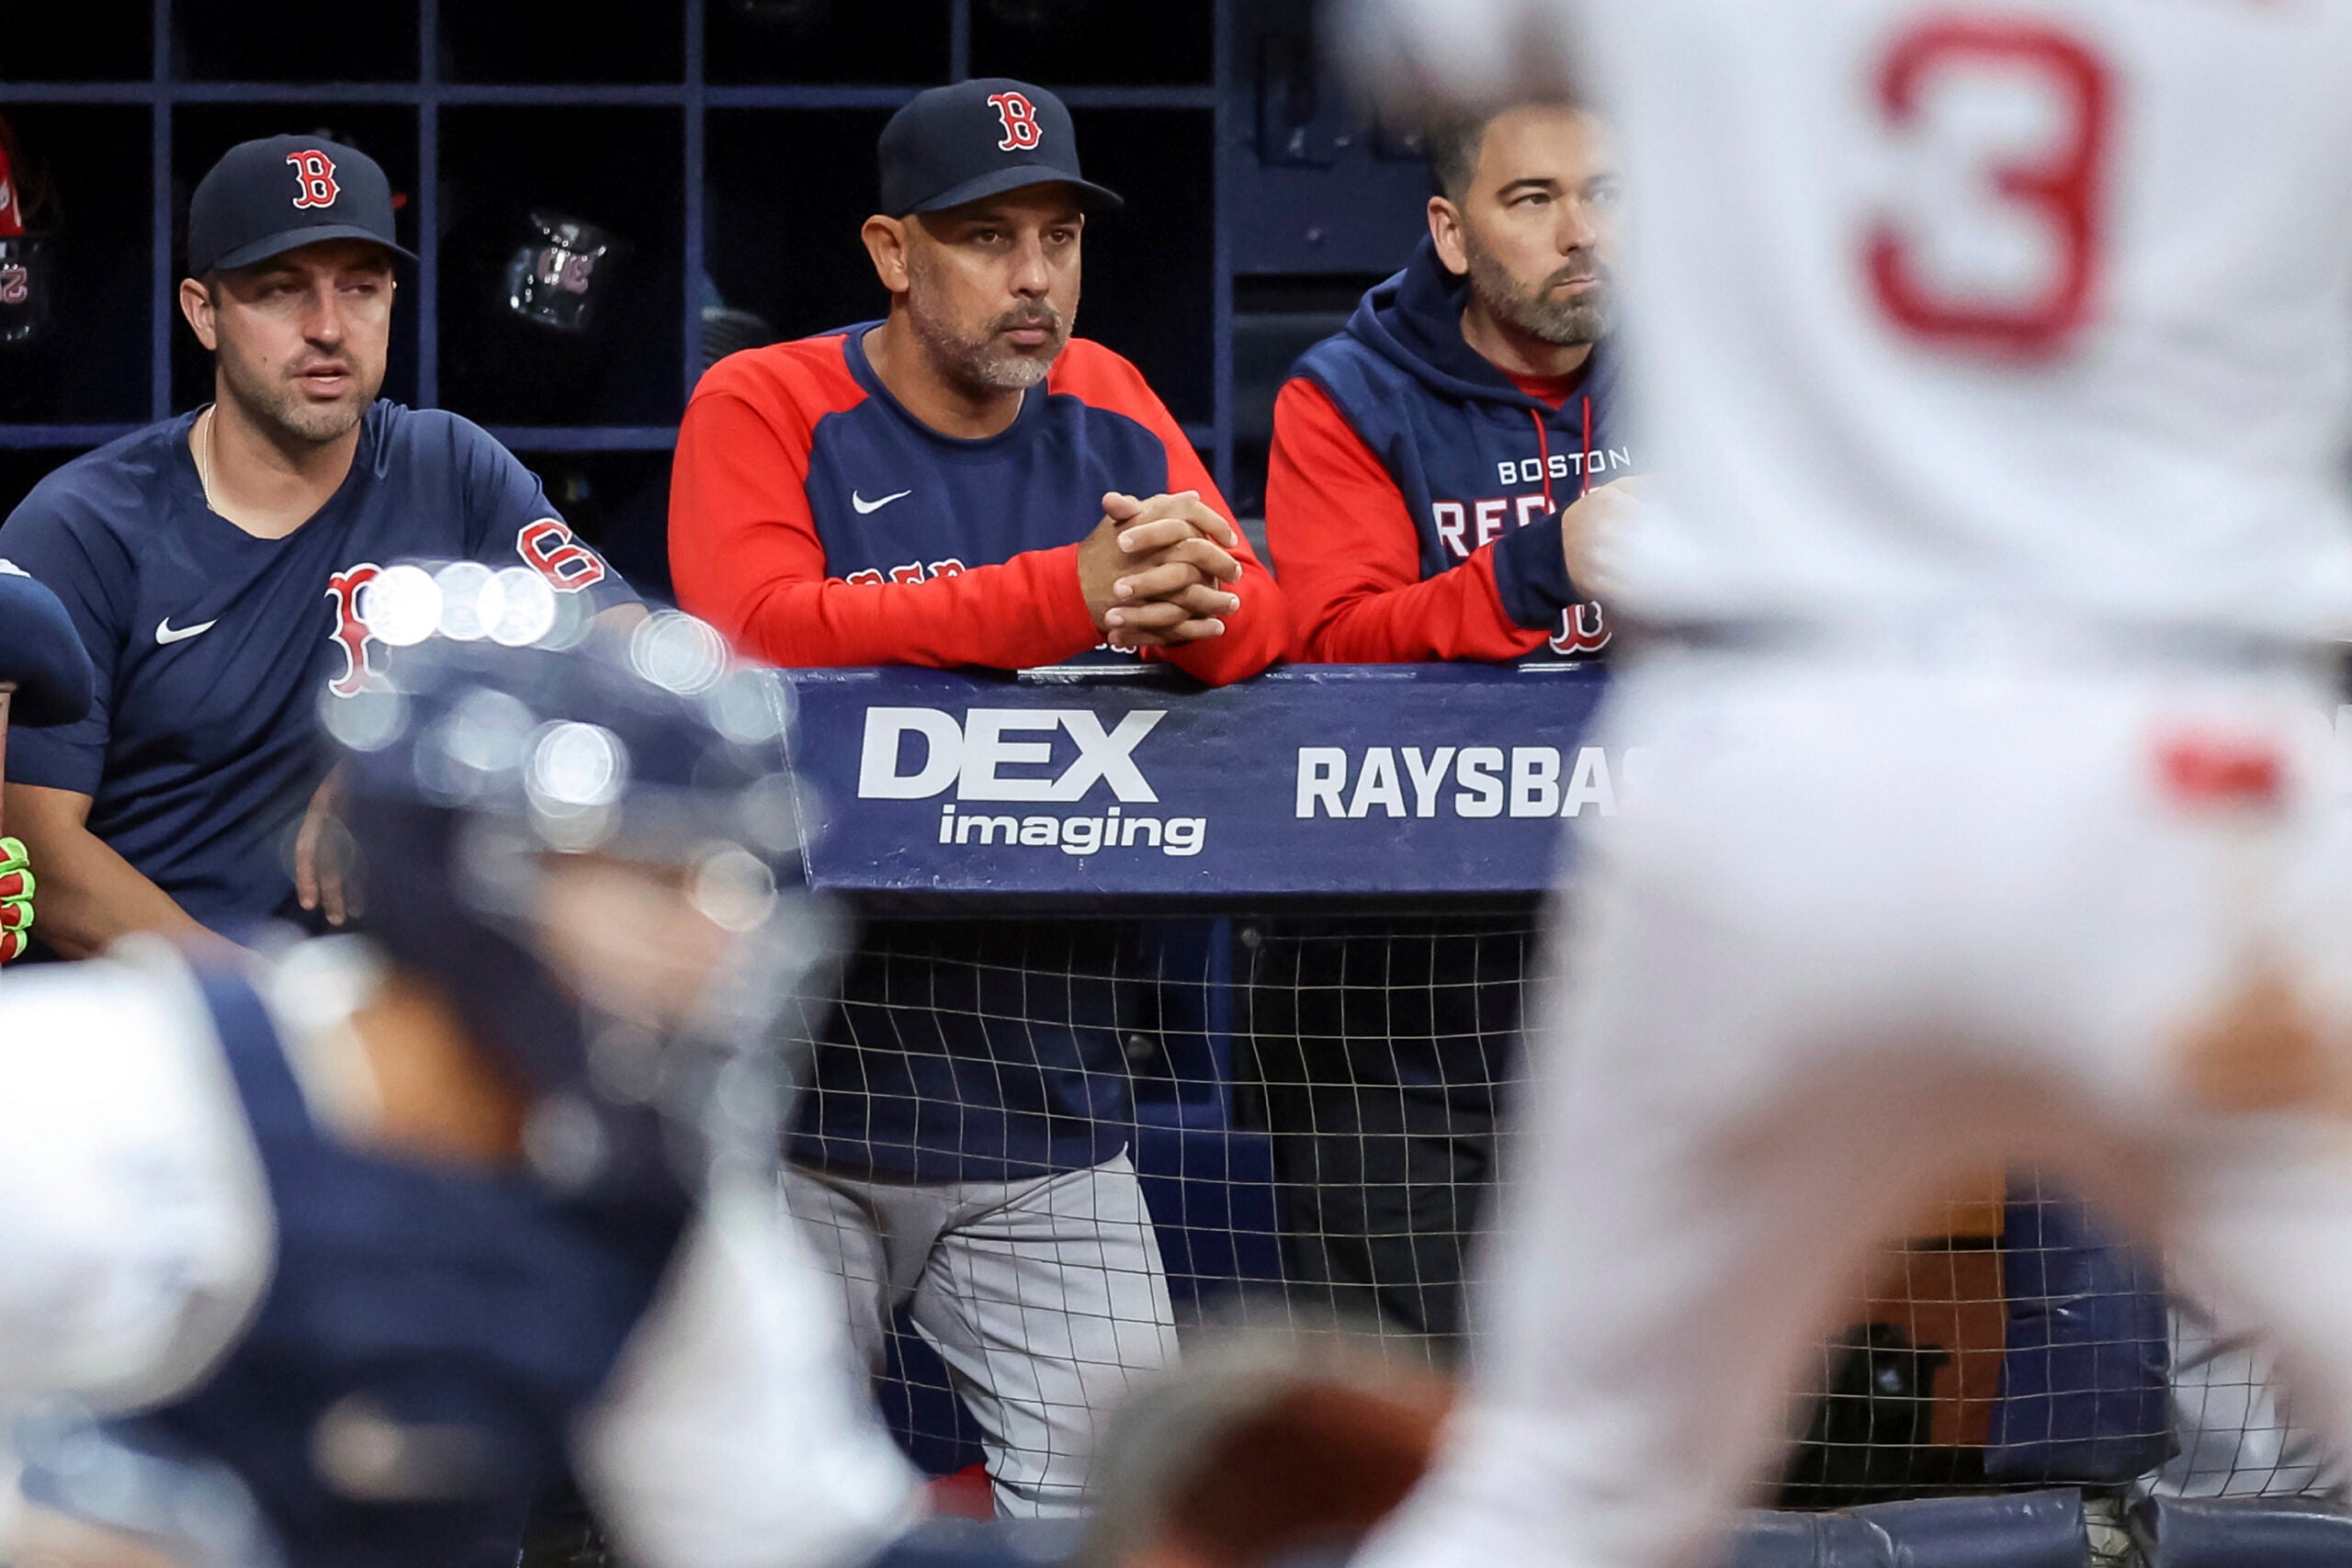 Long the bullies, the Red Sox and Yankees suddenly share some spongy